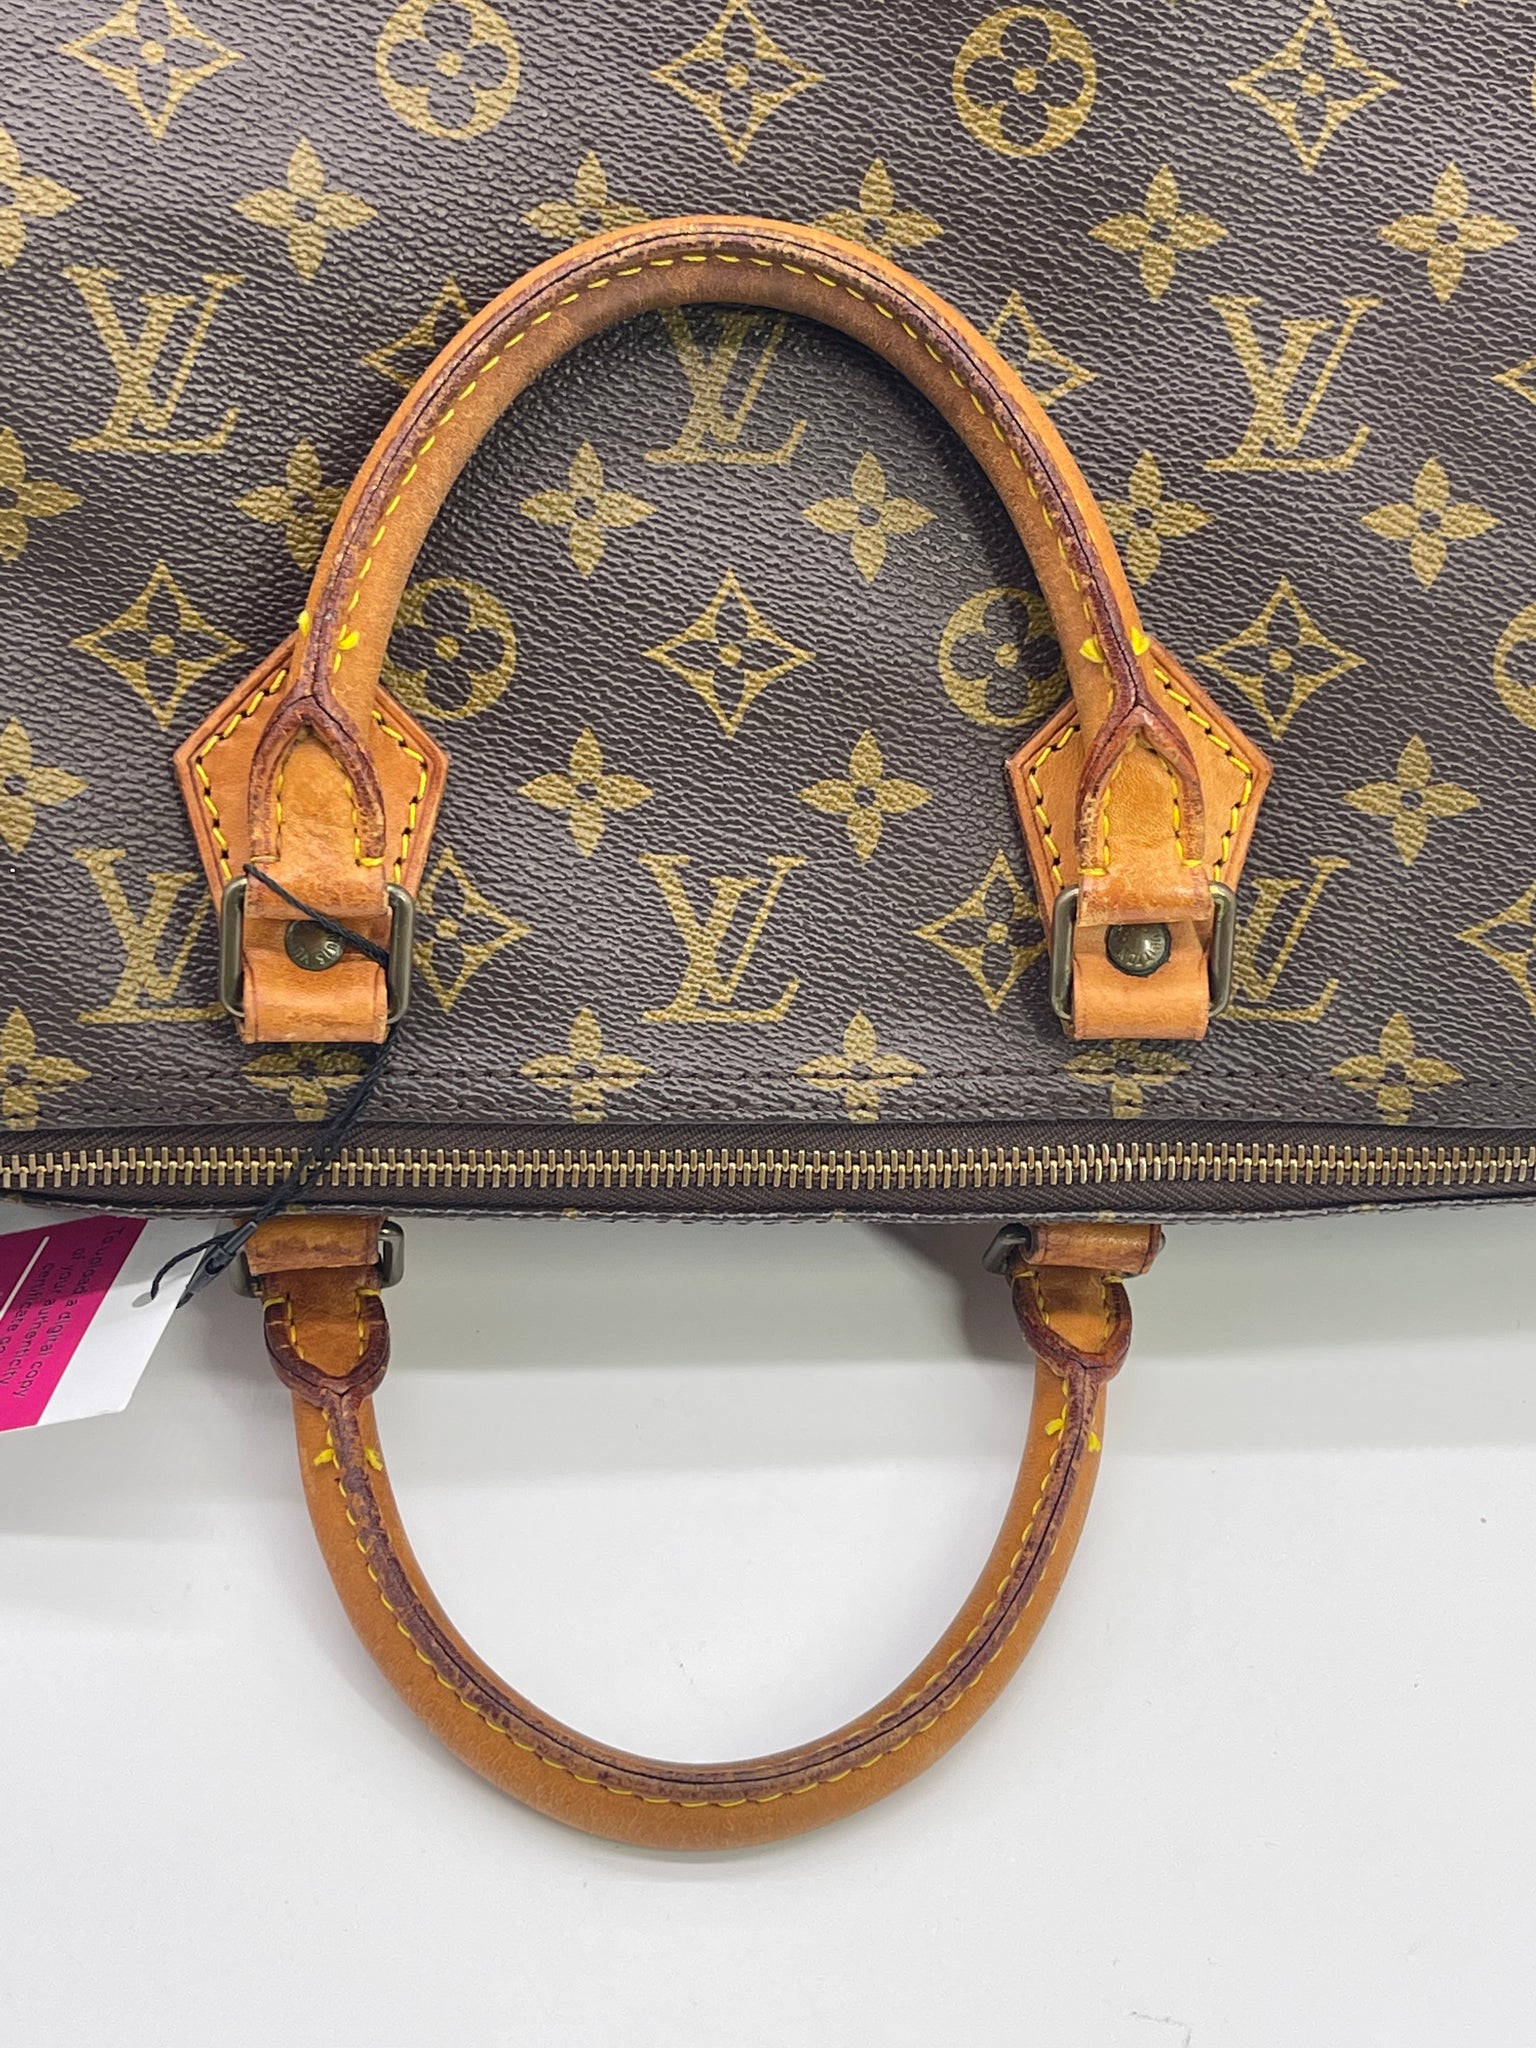 Buy Free Shipping Authentic Pre-owned Louis Vuitton Speedy 40 Monogram  Duffle Bag Hand Bag Purse M41522 M41106 150400 from Japan - Buy authentic  Plus exclusive items from Japan